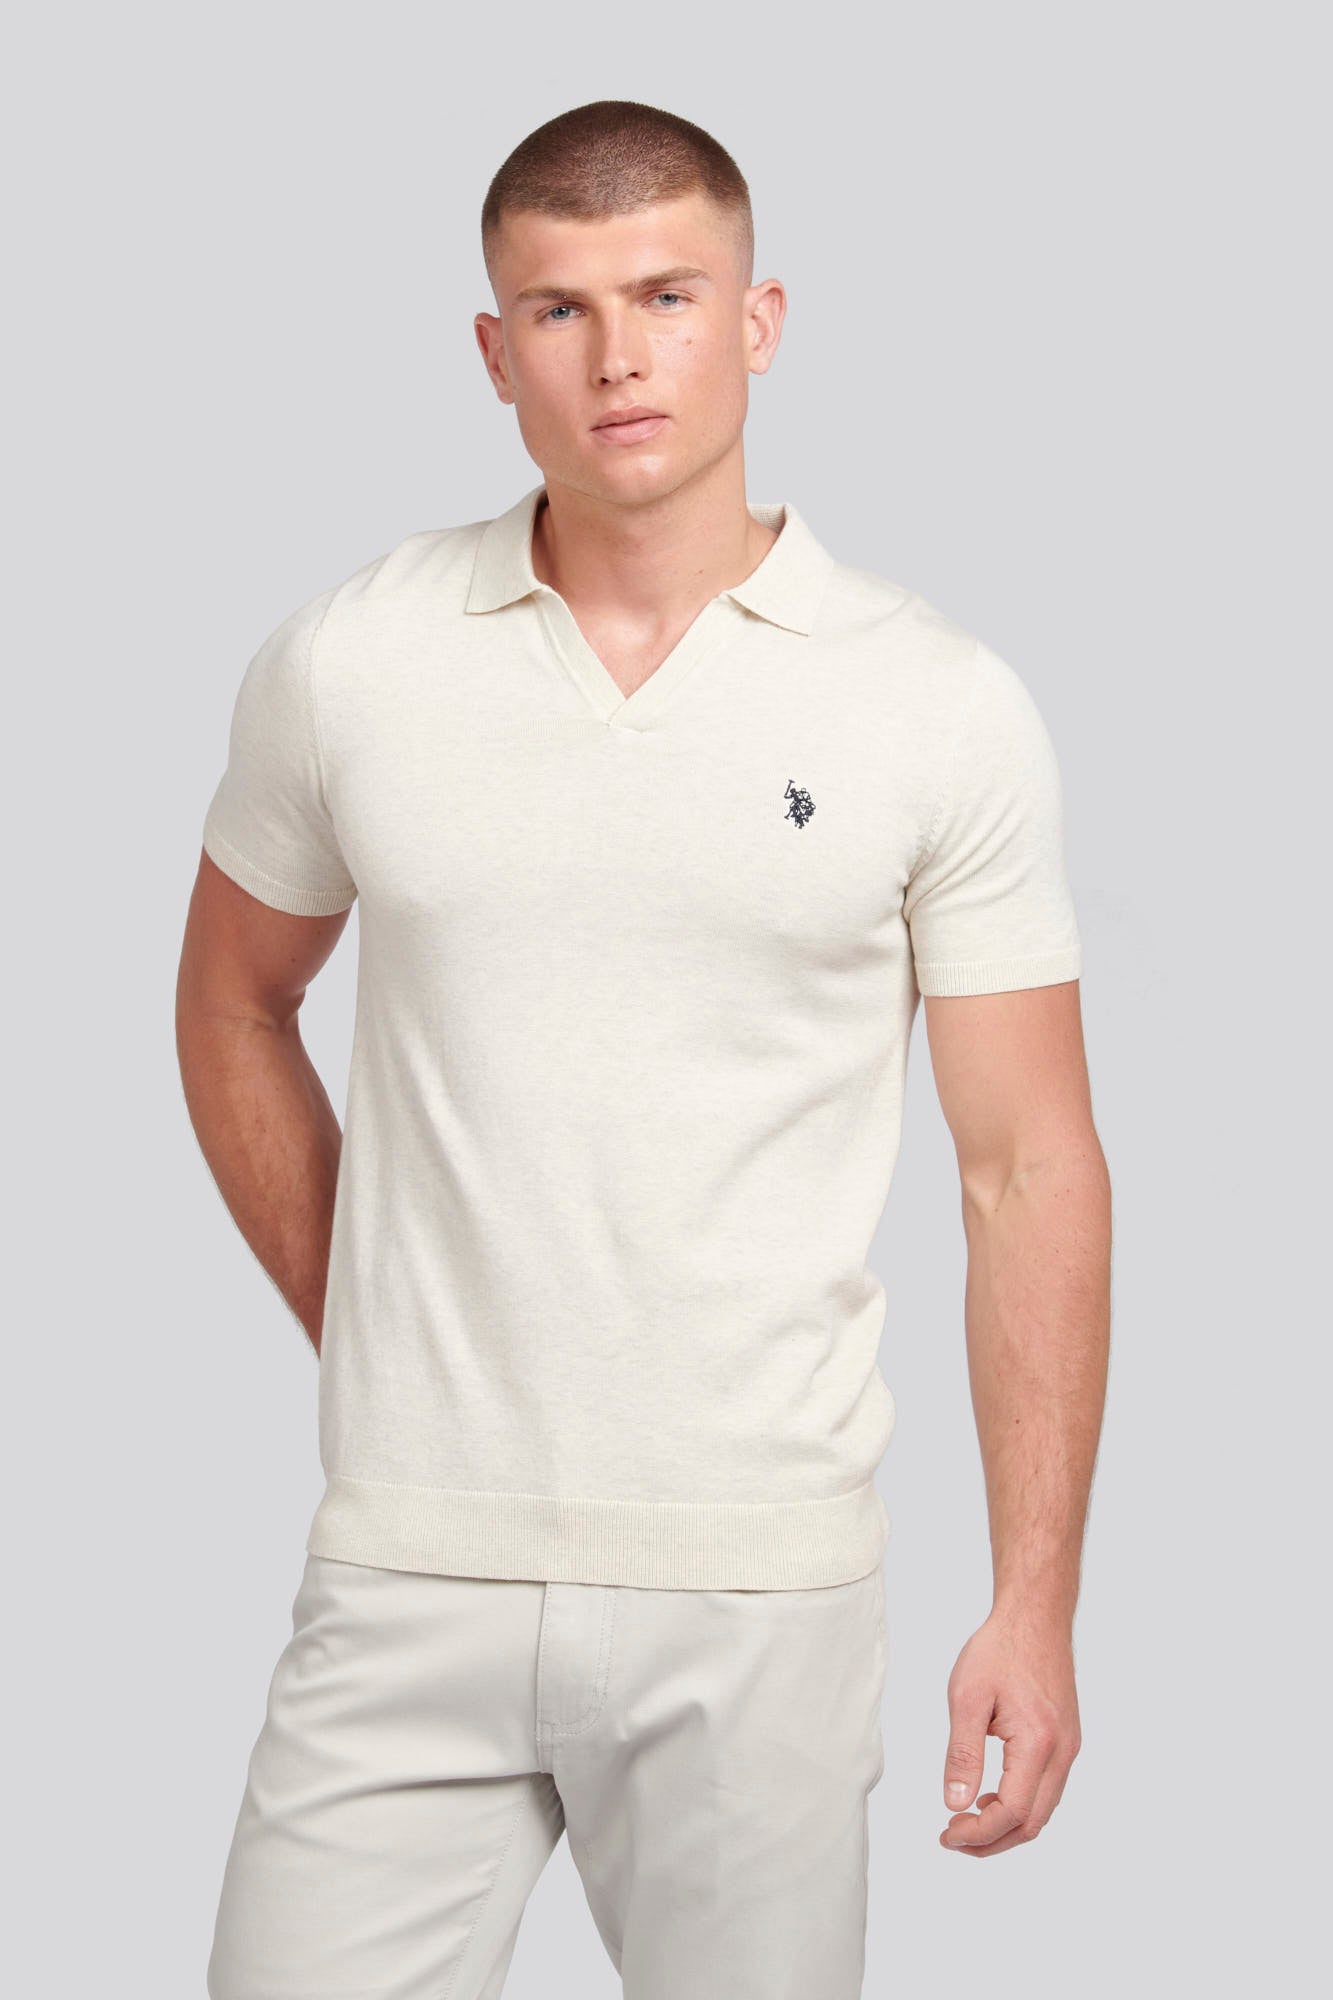 U.S. Polo Assn. Mens Regular Fit Combed Cotton Polo Shirt in Birch Marl